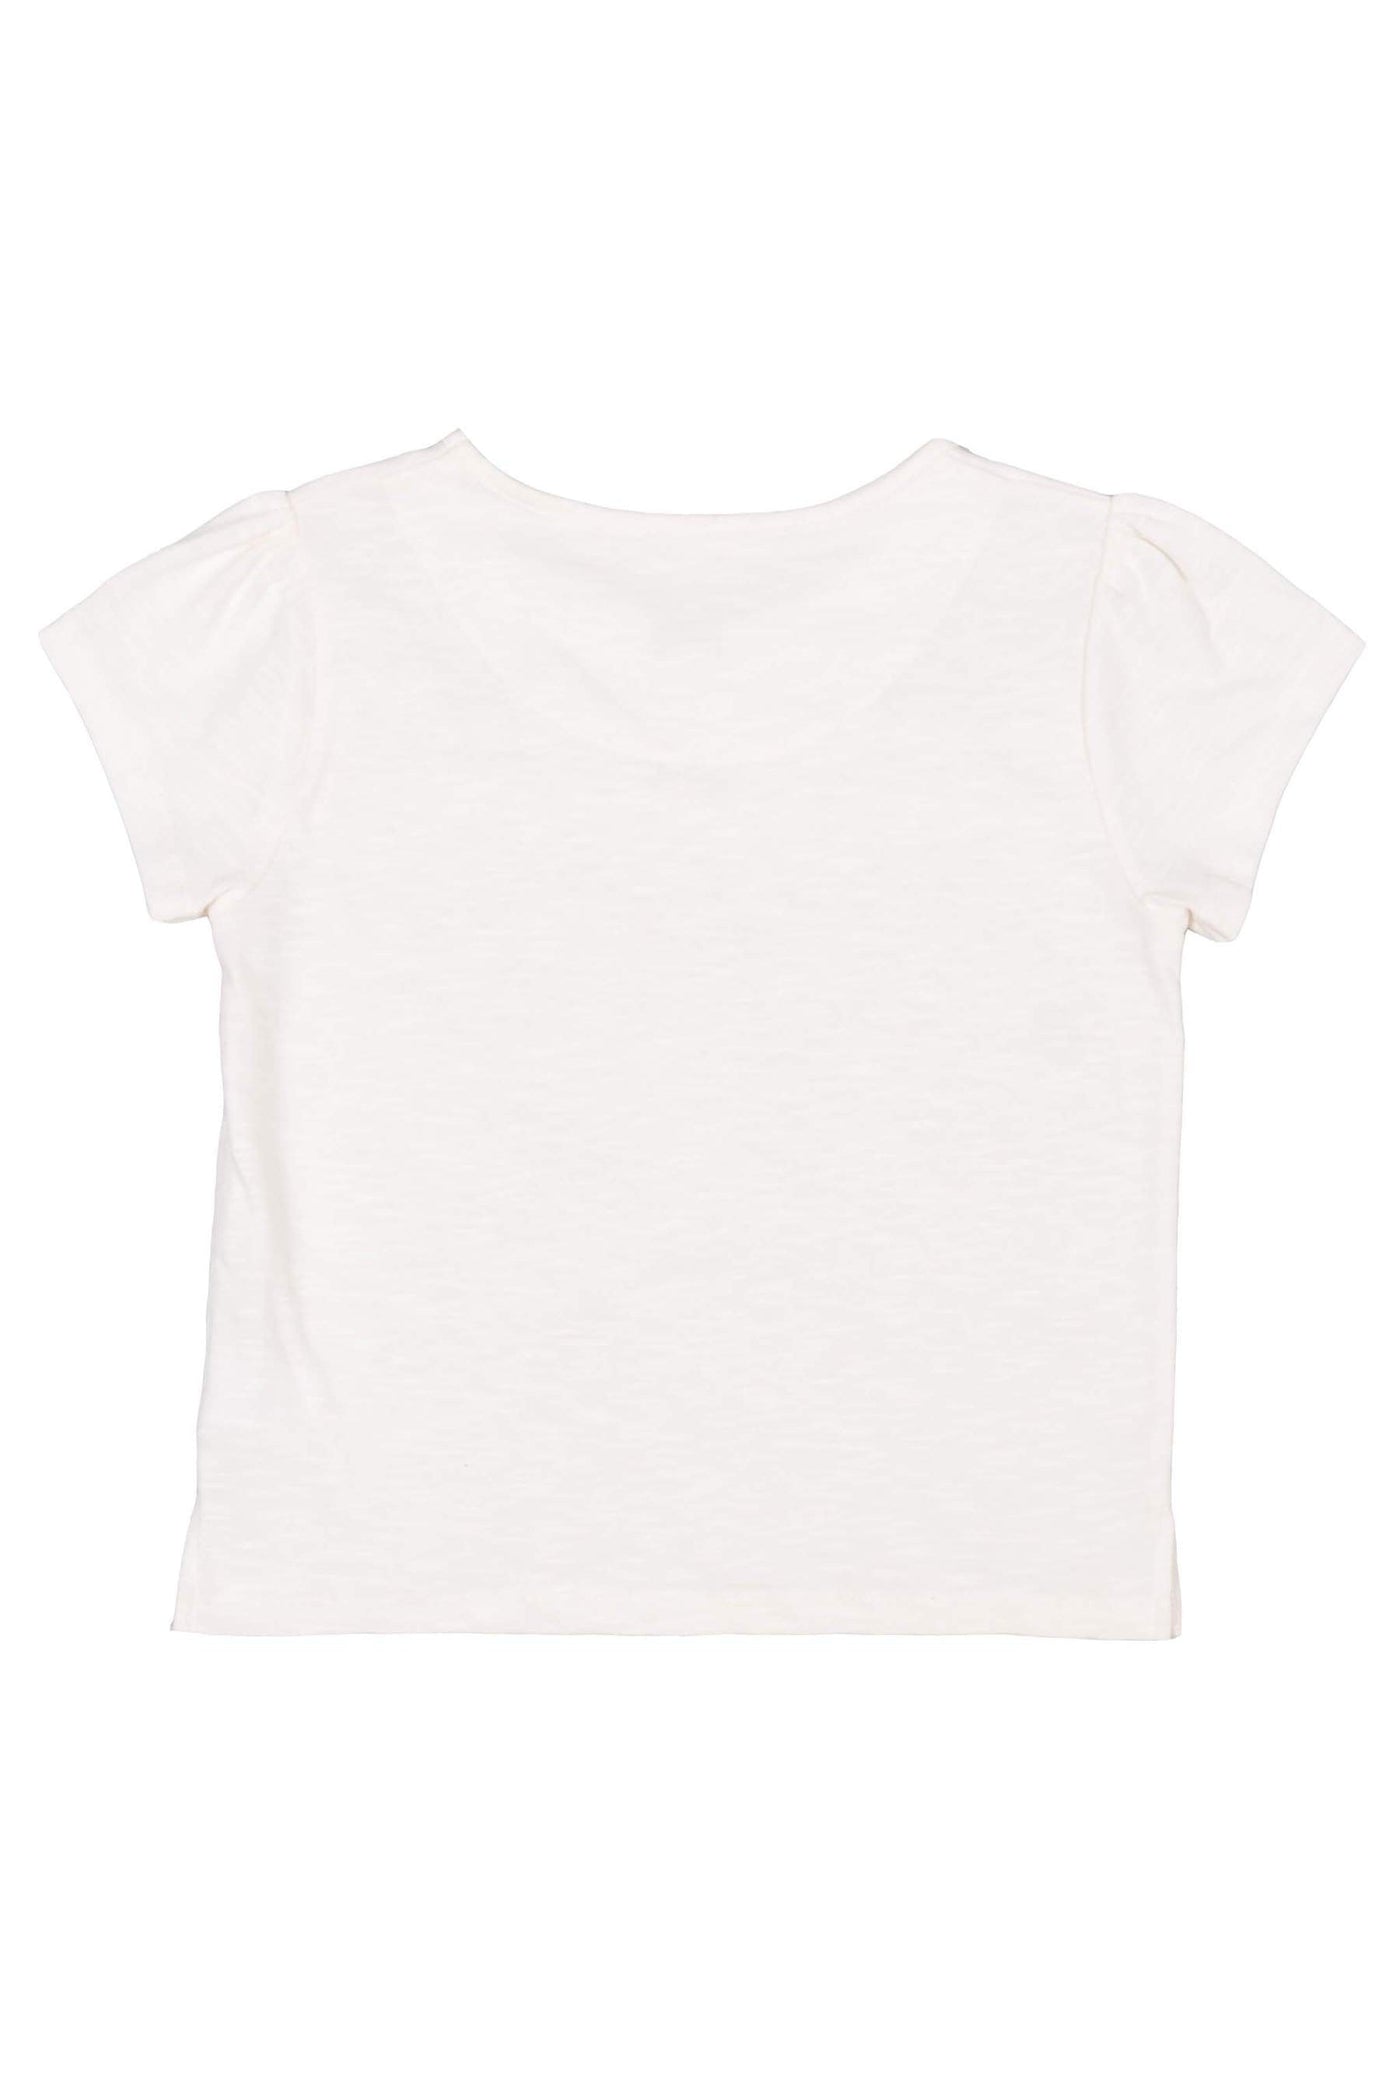 Kite Daisy T-Shirt-Kids-Ohh! By Gum - Shop Sustainable